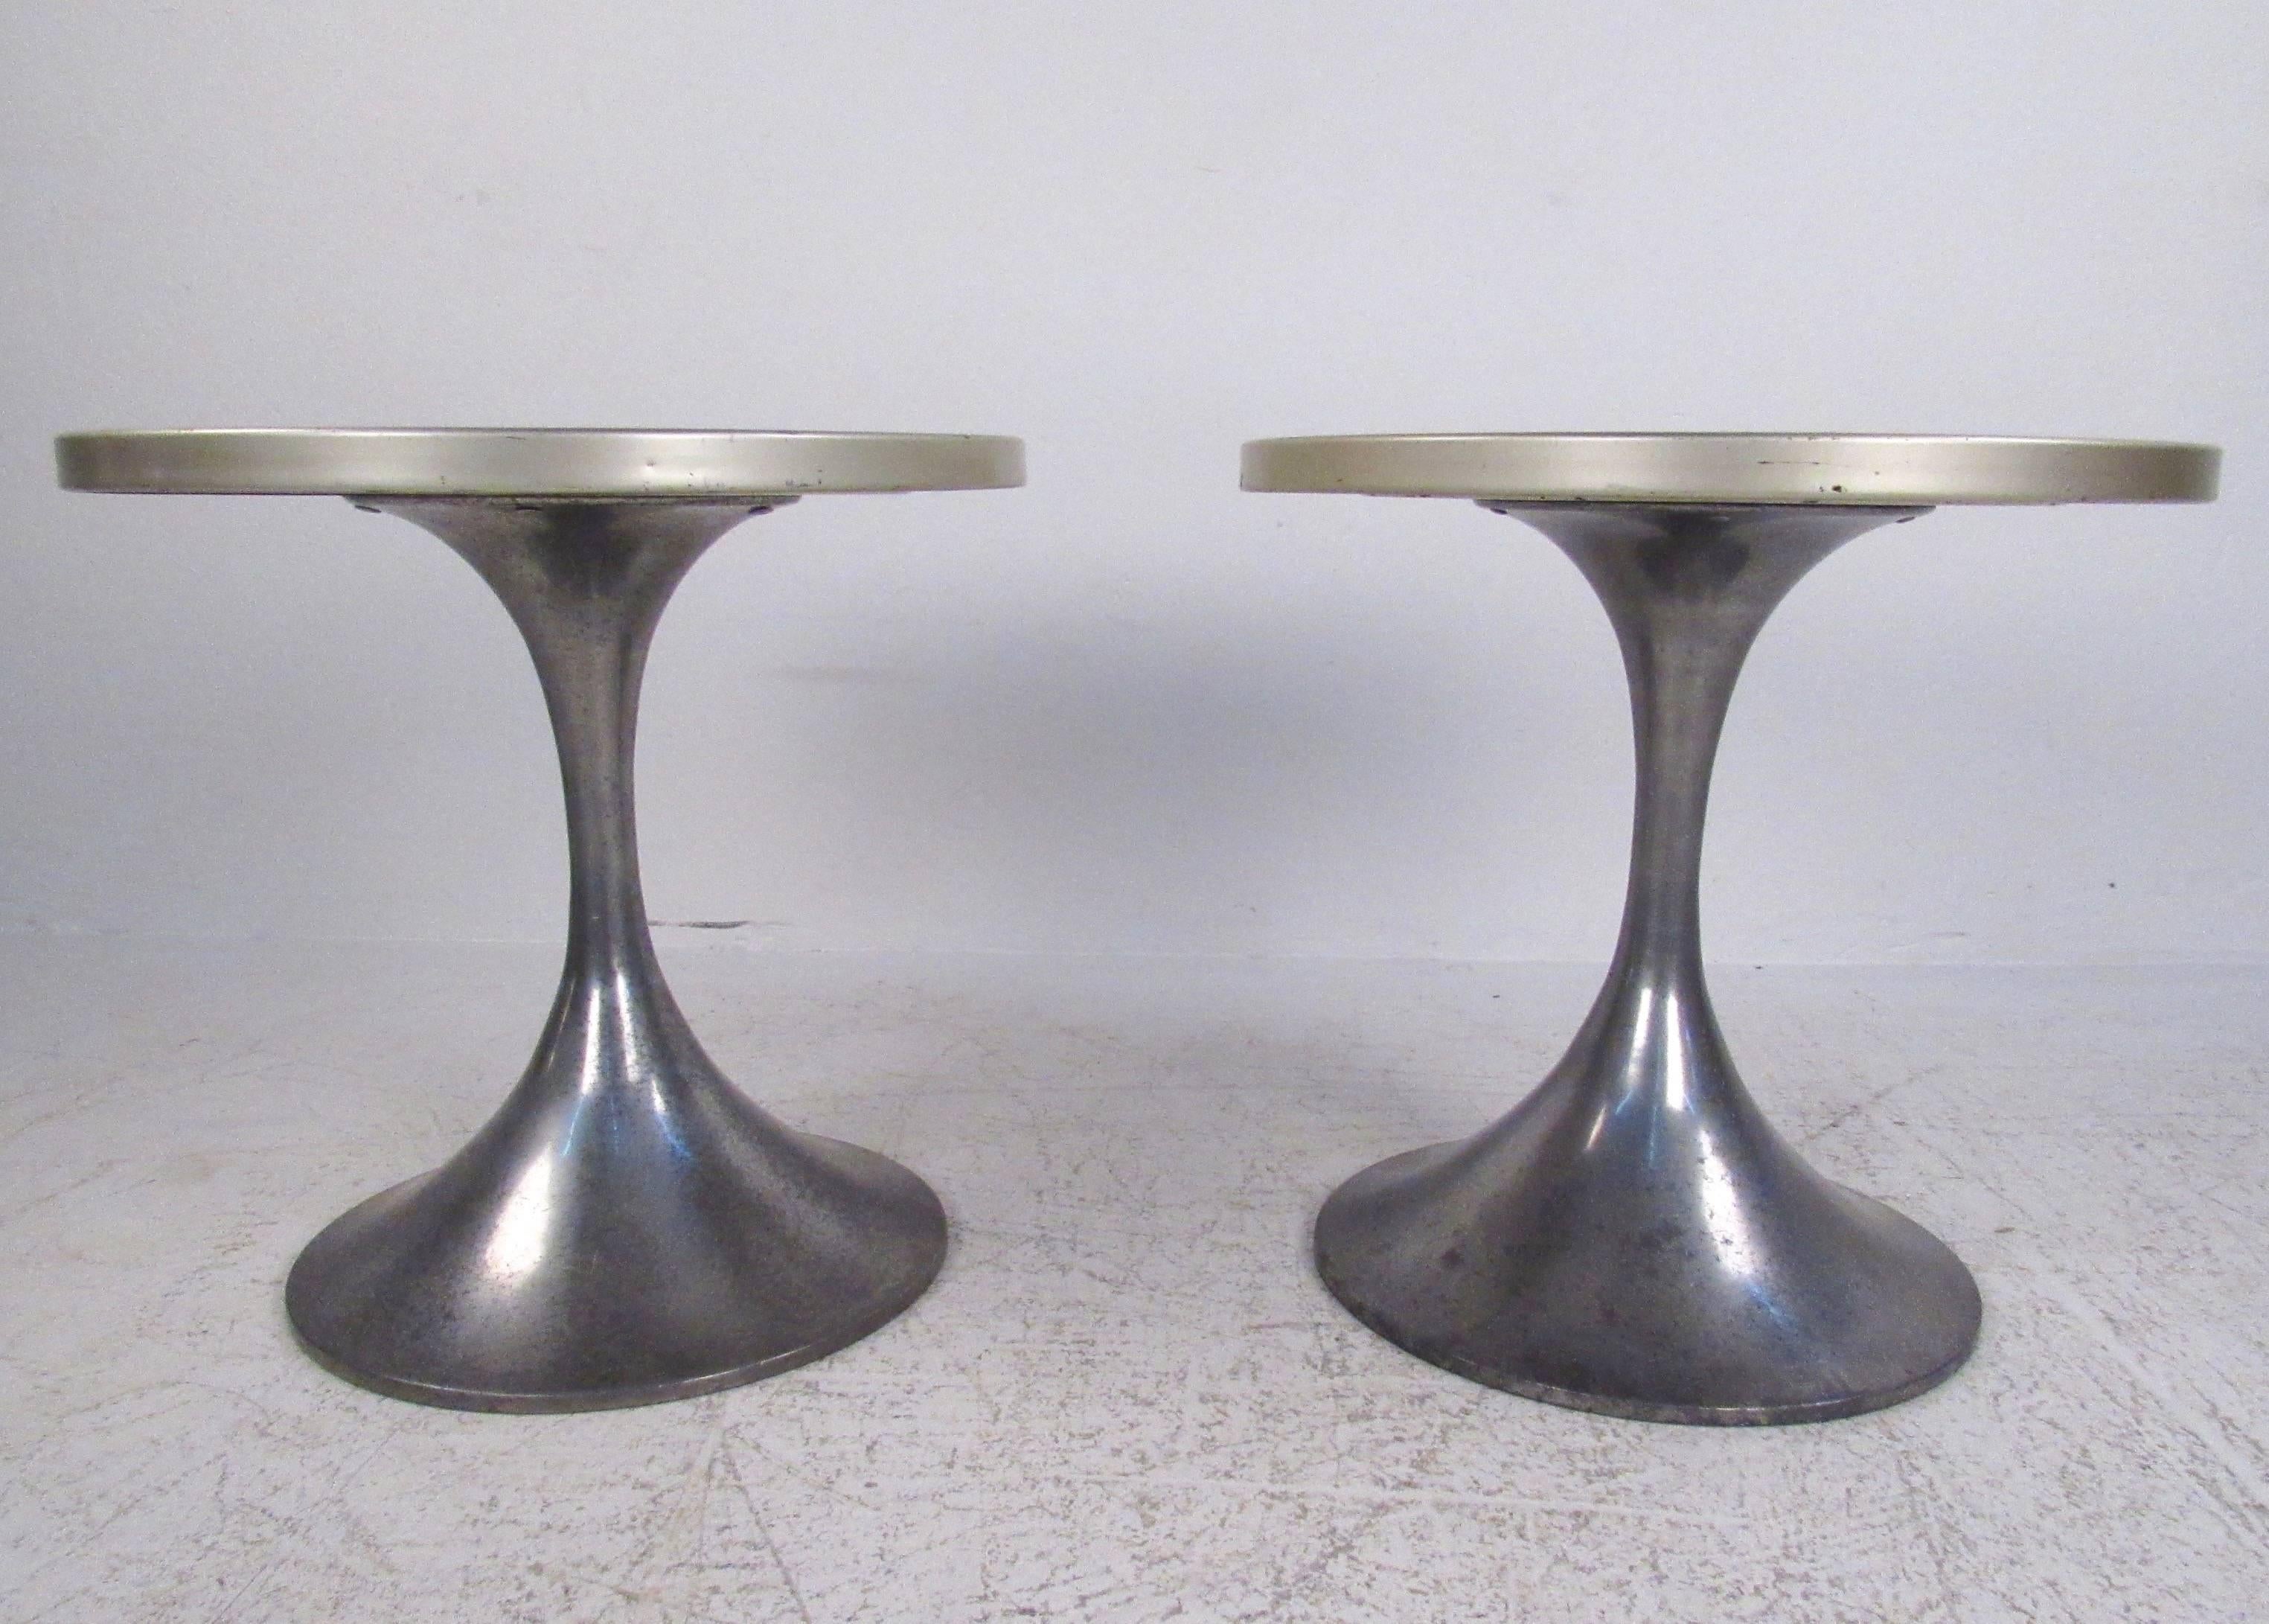 Pair of German Modern Tulip Pedestal Side Tables by HW Metallbau In Good Condition For Sale In Brooklyn, NY